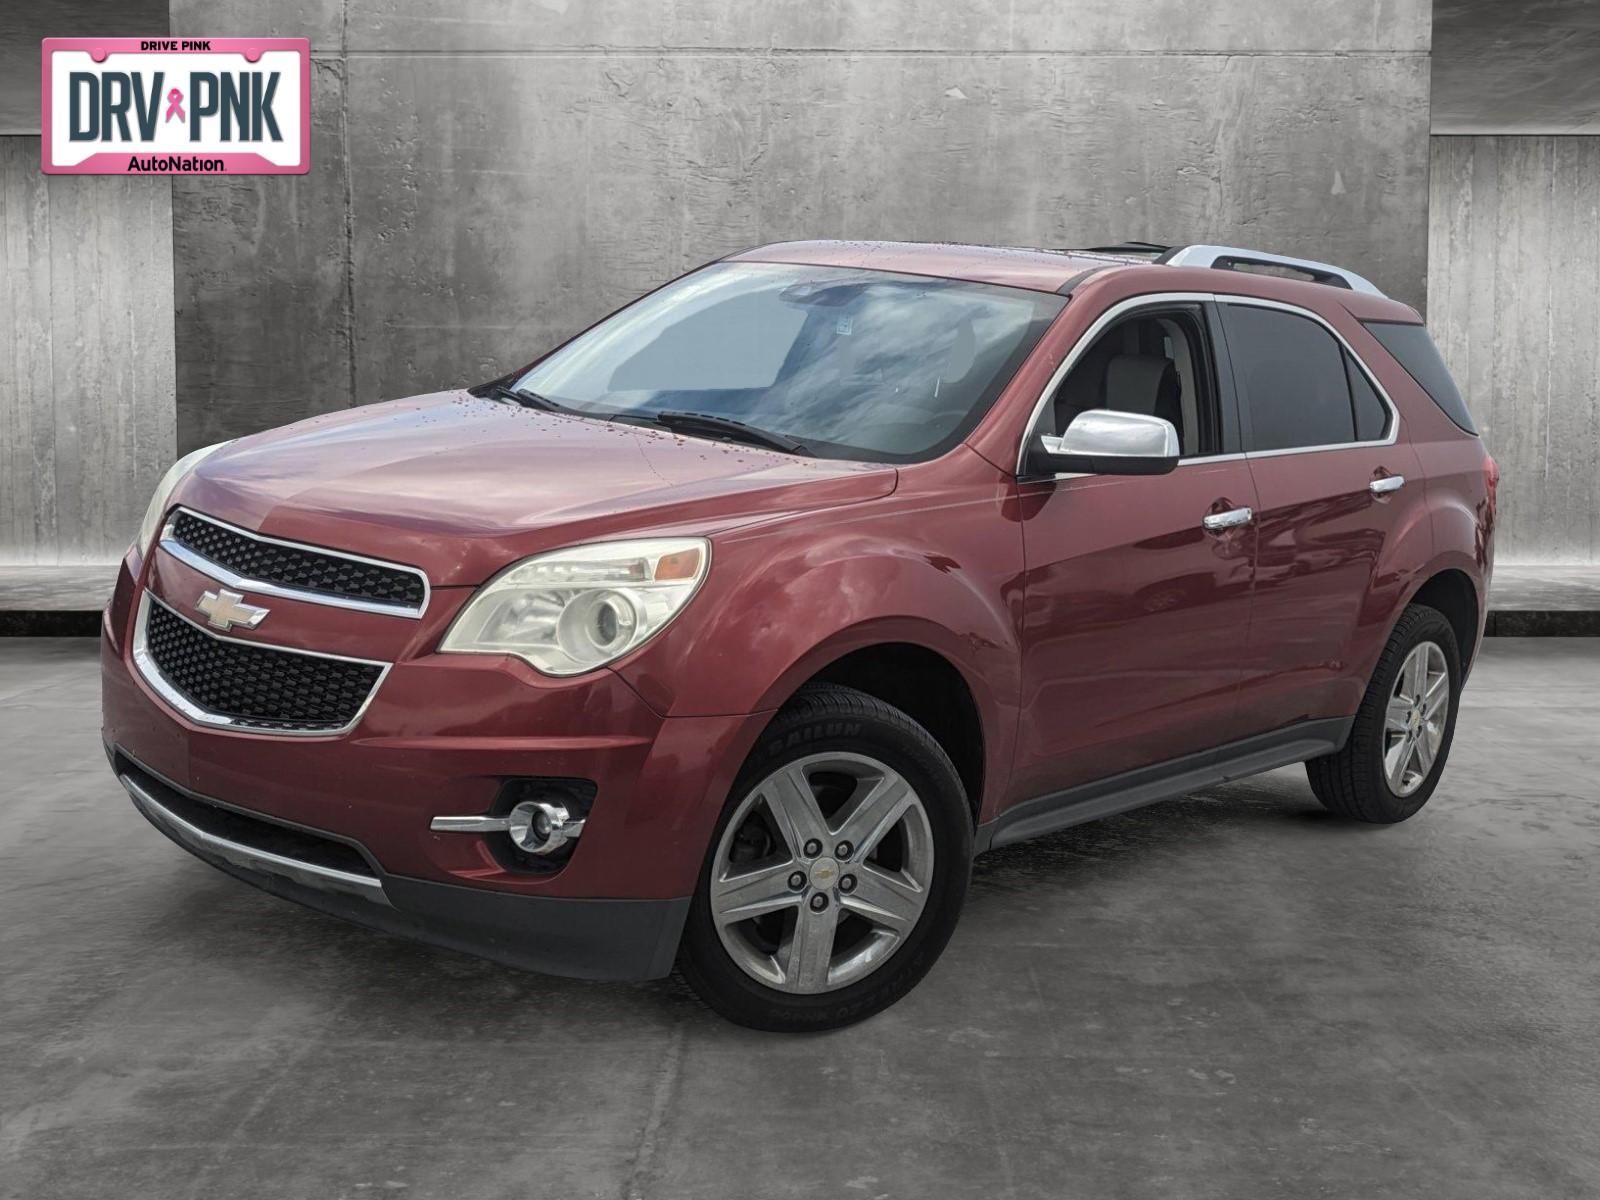 2014 Chevrolet Equinox Vehicle Photo in Ft. Myers, FL 33907